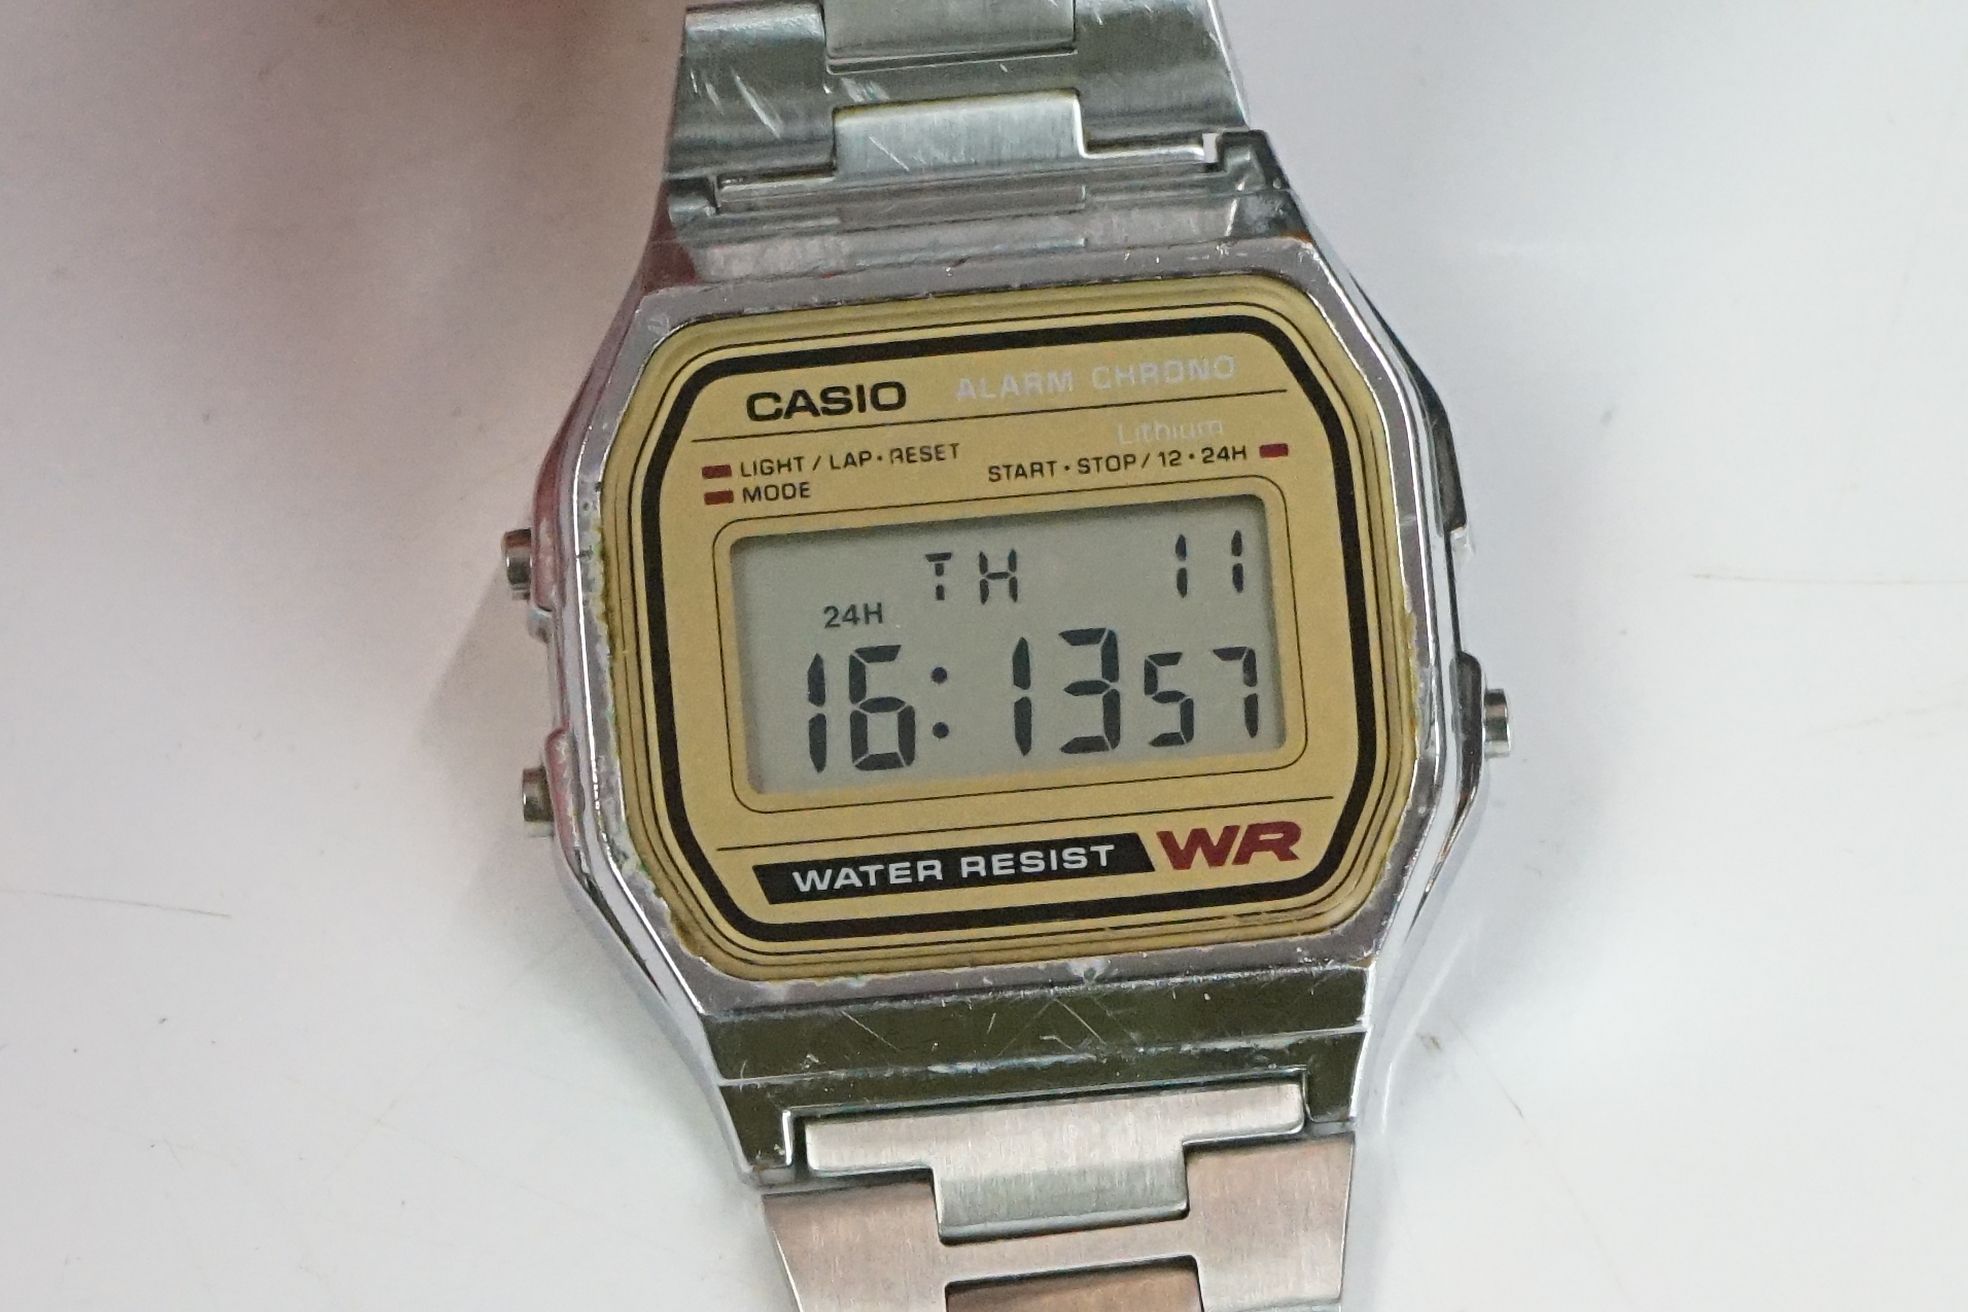 Collection of LCD Watches including Seiko, Casio, Lambda, etc - Image 7 of 14